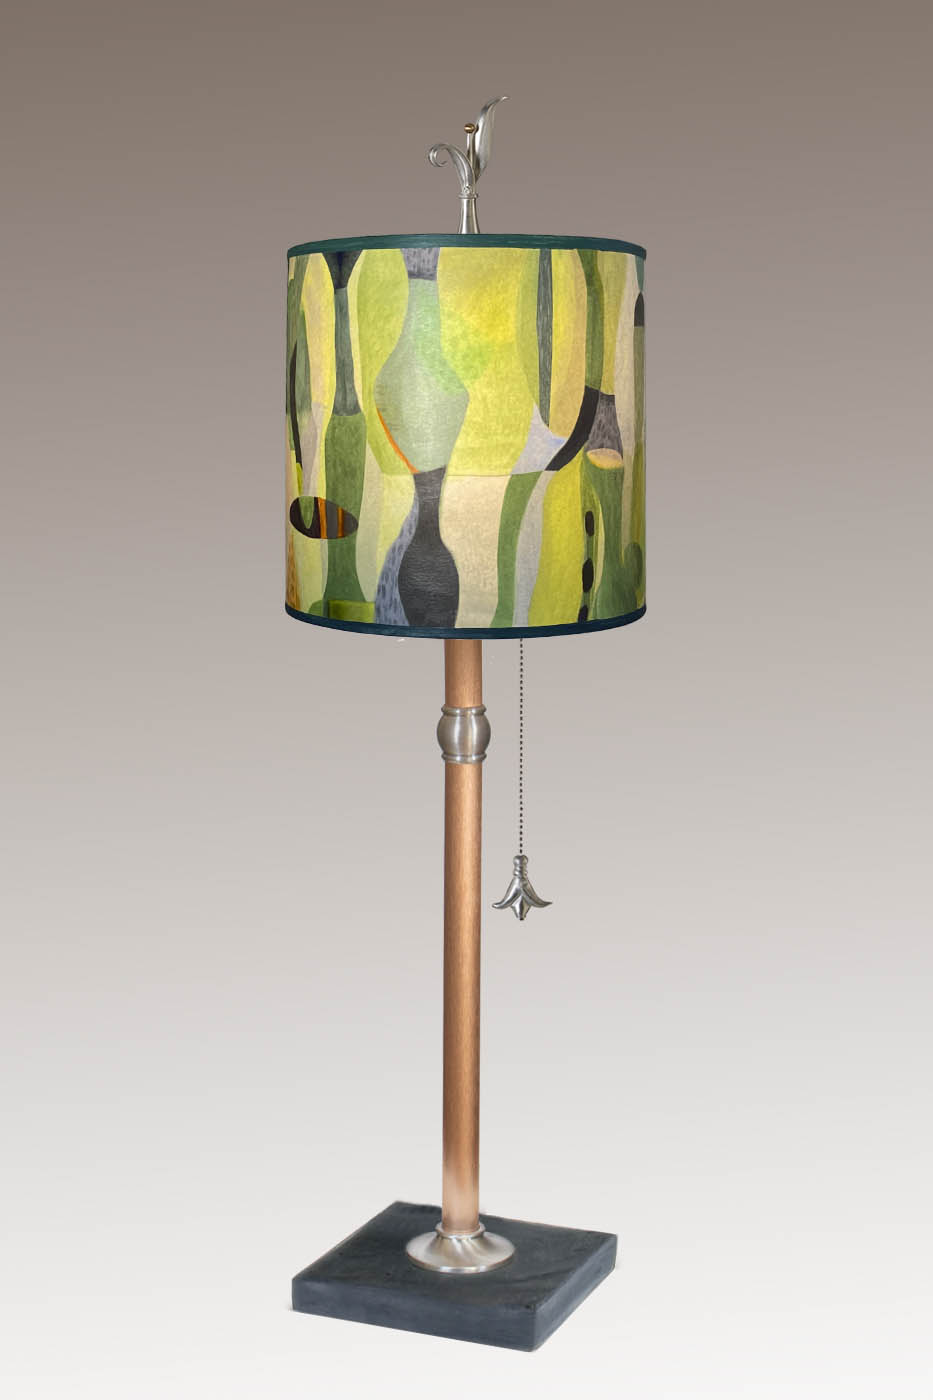 Janna Ugone &amp; Co Table Lamp Copper Table Lamp with Medium Drum Shade in Riviera in Citrus